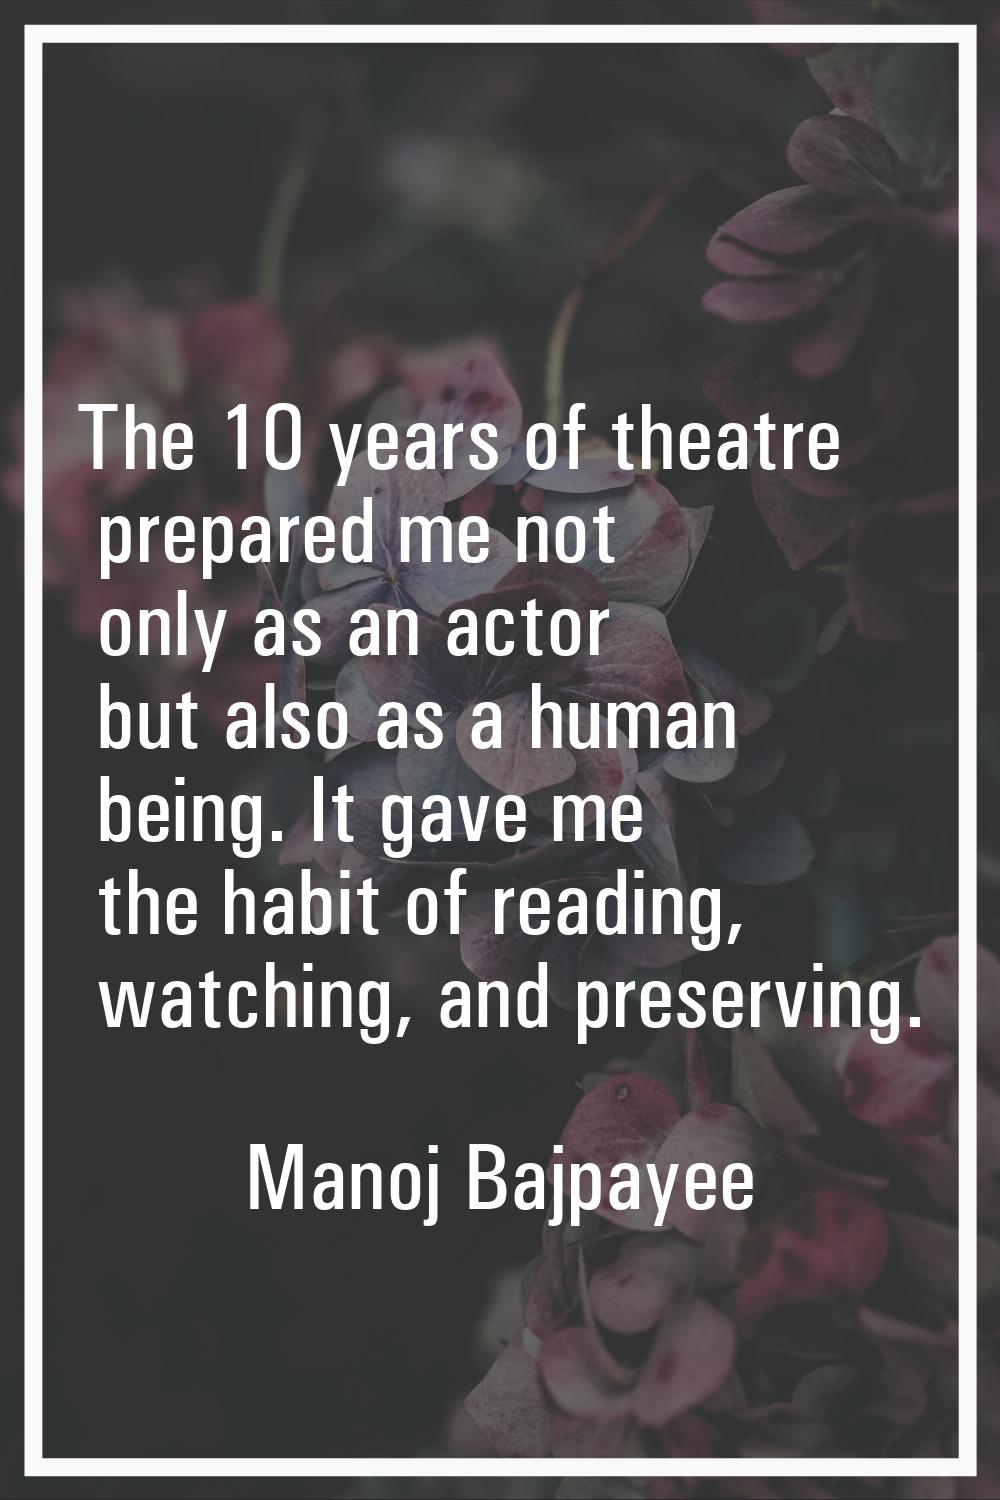 The 10 years of theatre prepared me not only as an actor but also as a human being. It gave me the 